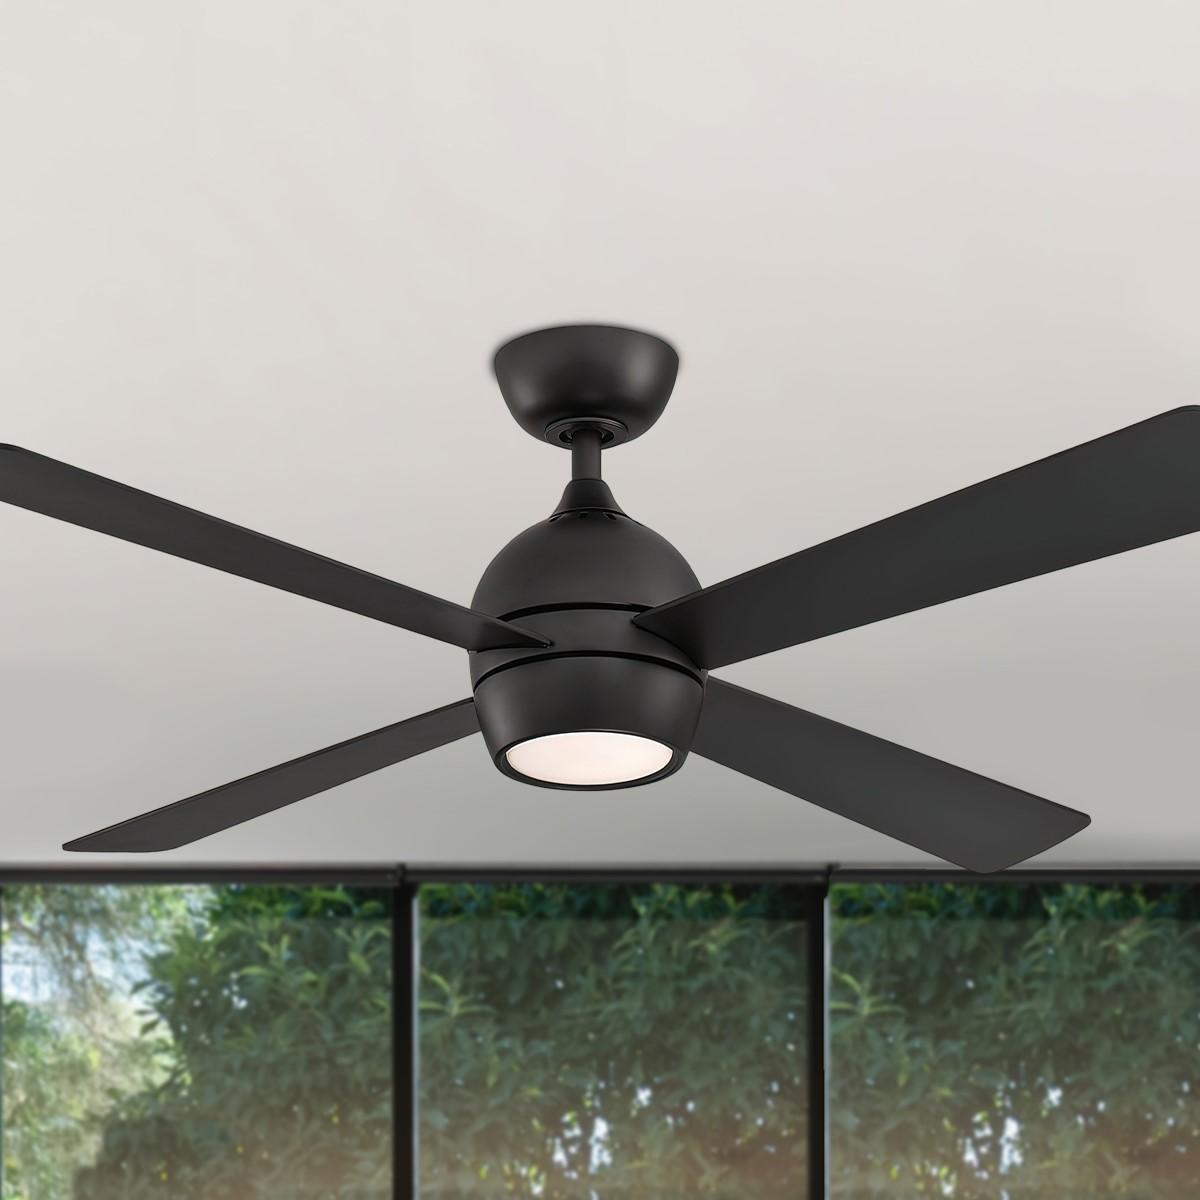 Kwad 52 Inch Modern Ceiling Fan With Light And Remote, Opal Frosted Glass